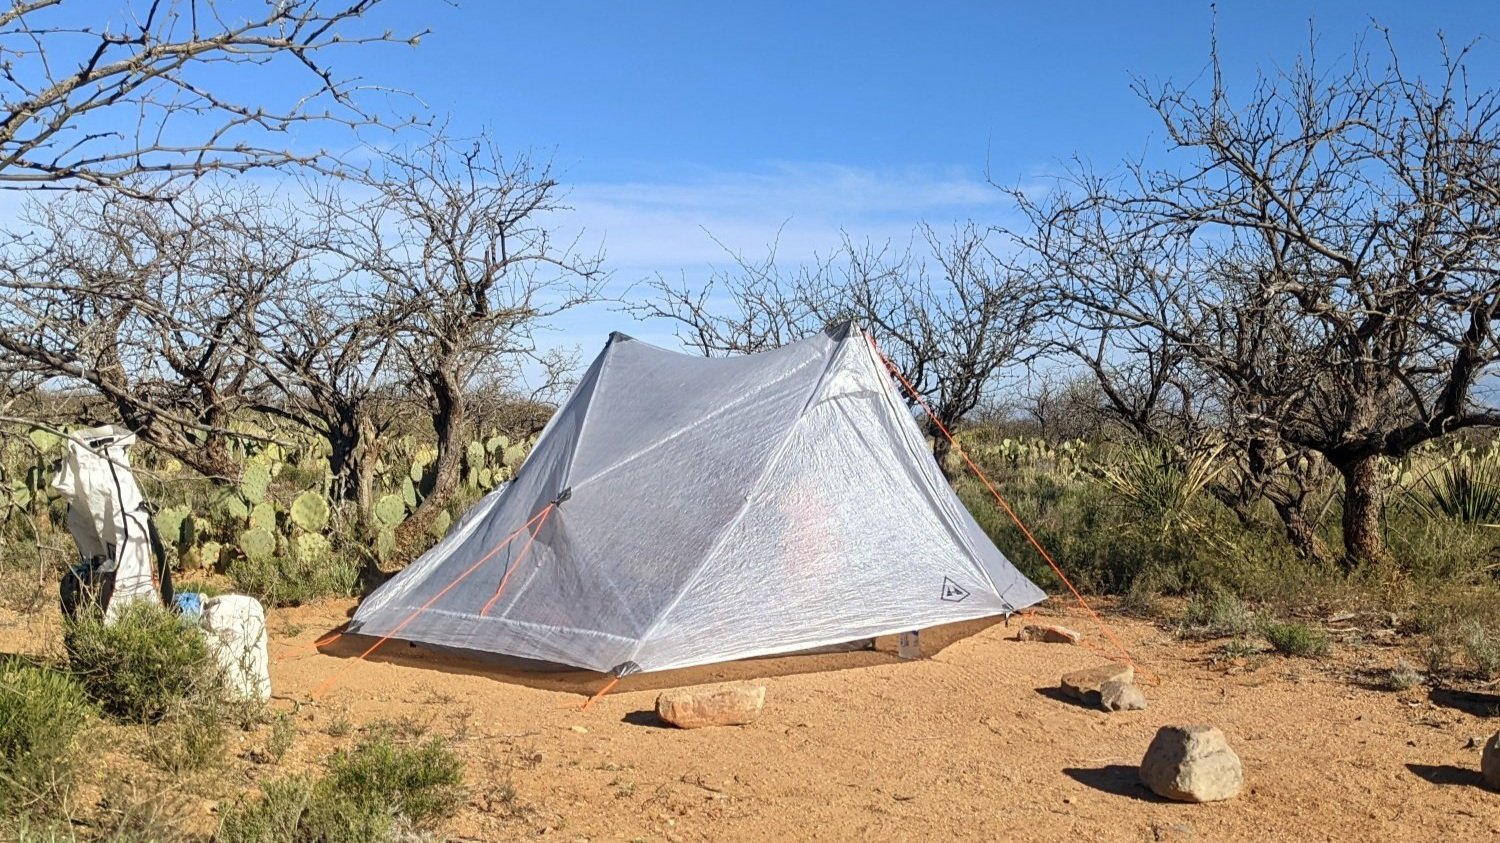 The Hyperlite Mountain Gear Unbound 2 tent pitched taut in a campsite surrounded by cacti